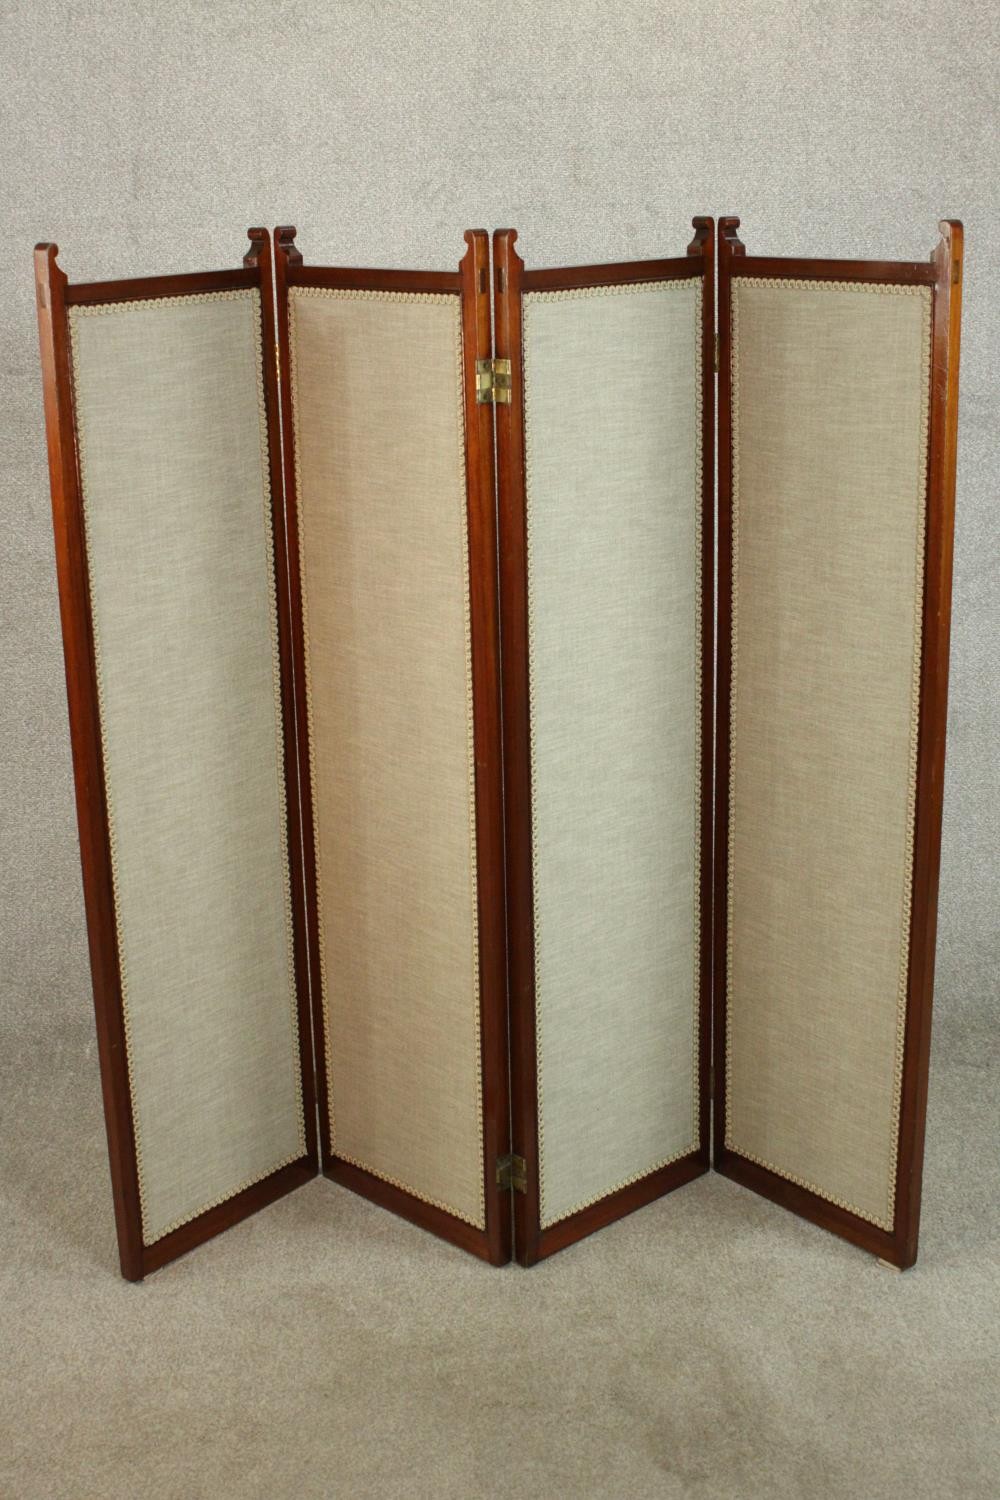 An Edwardian walnut fourfold screen, each panel upholstered with an oatmeal coloured fabric, with